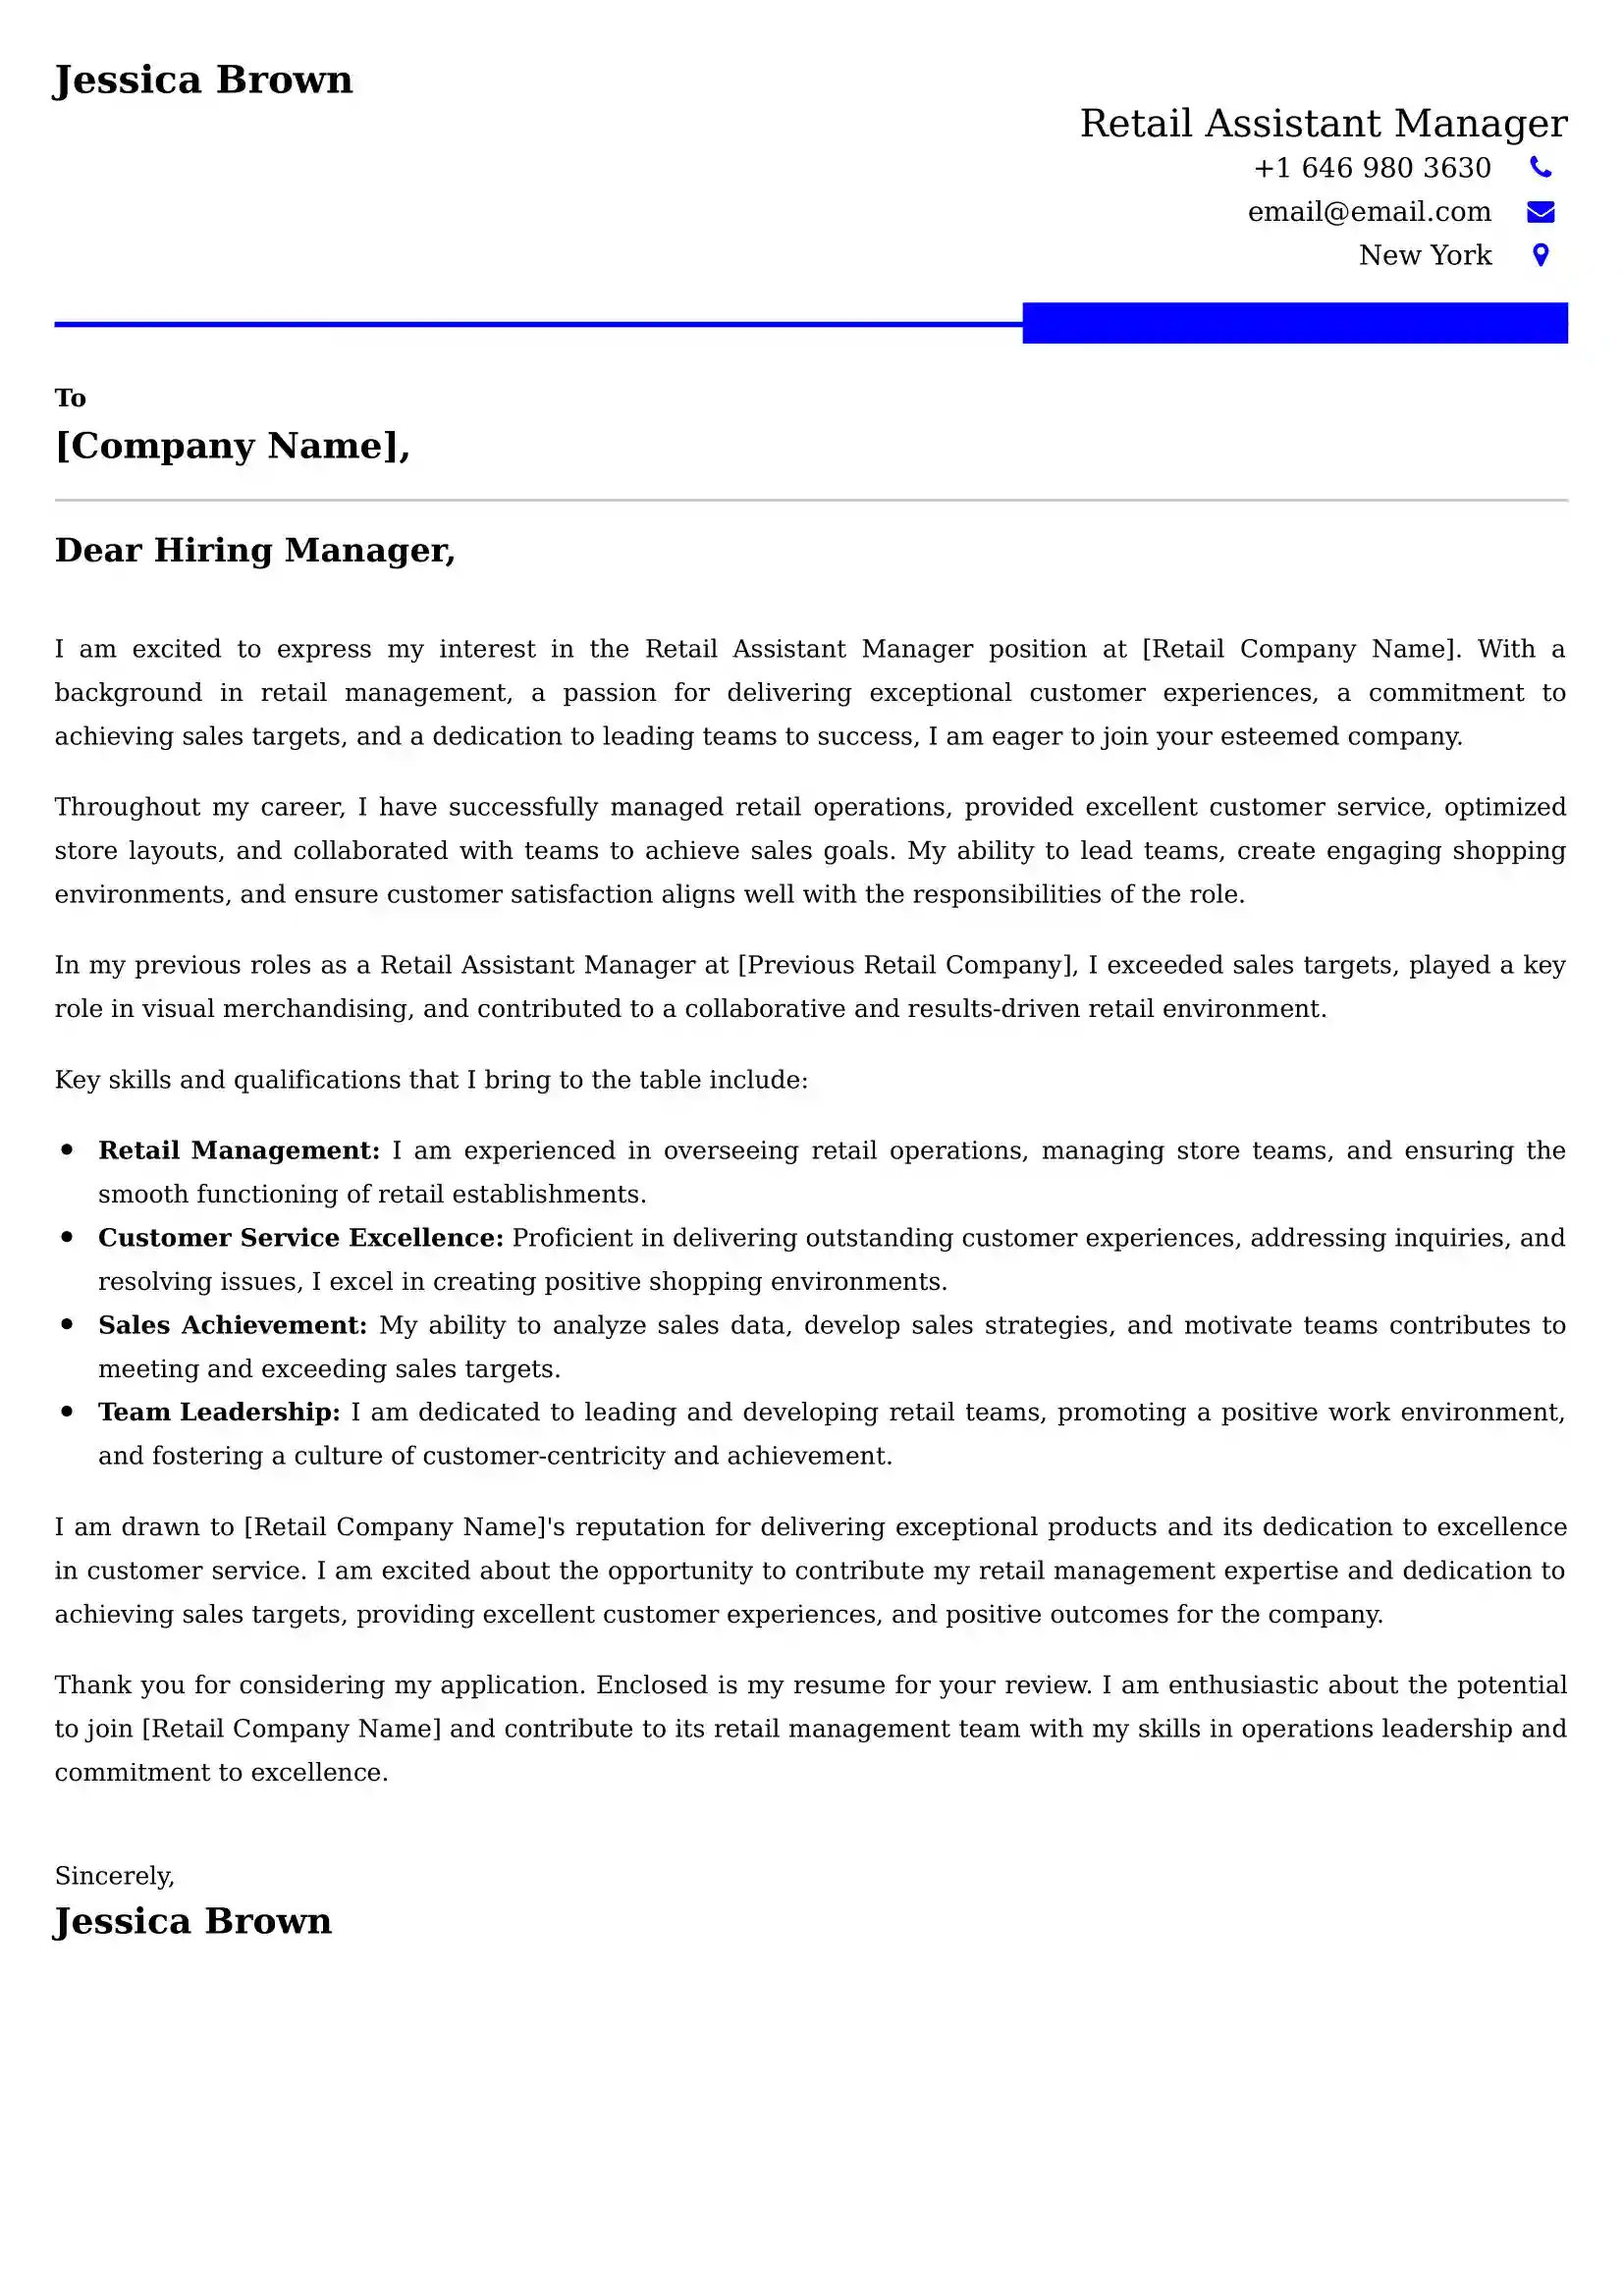 Retail Assistant Manager Cover Letter Examples -Latest Brazilian Templates